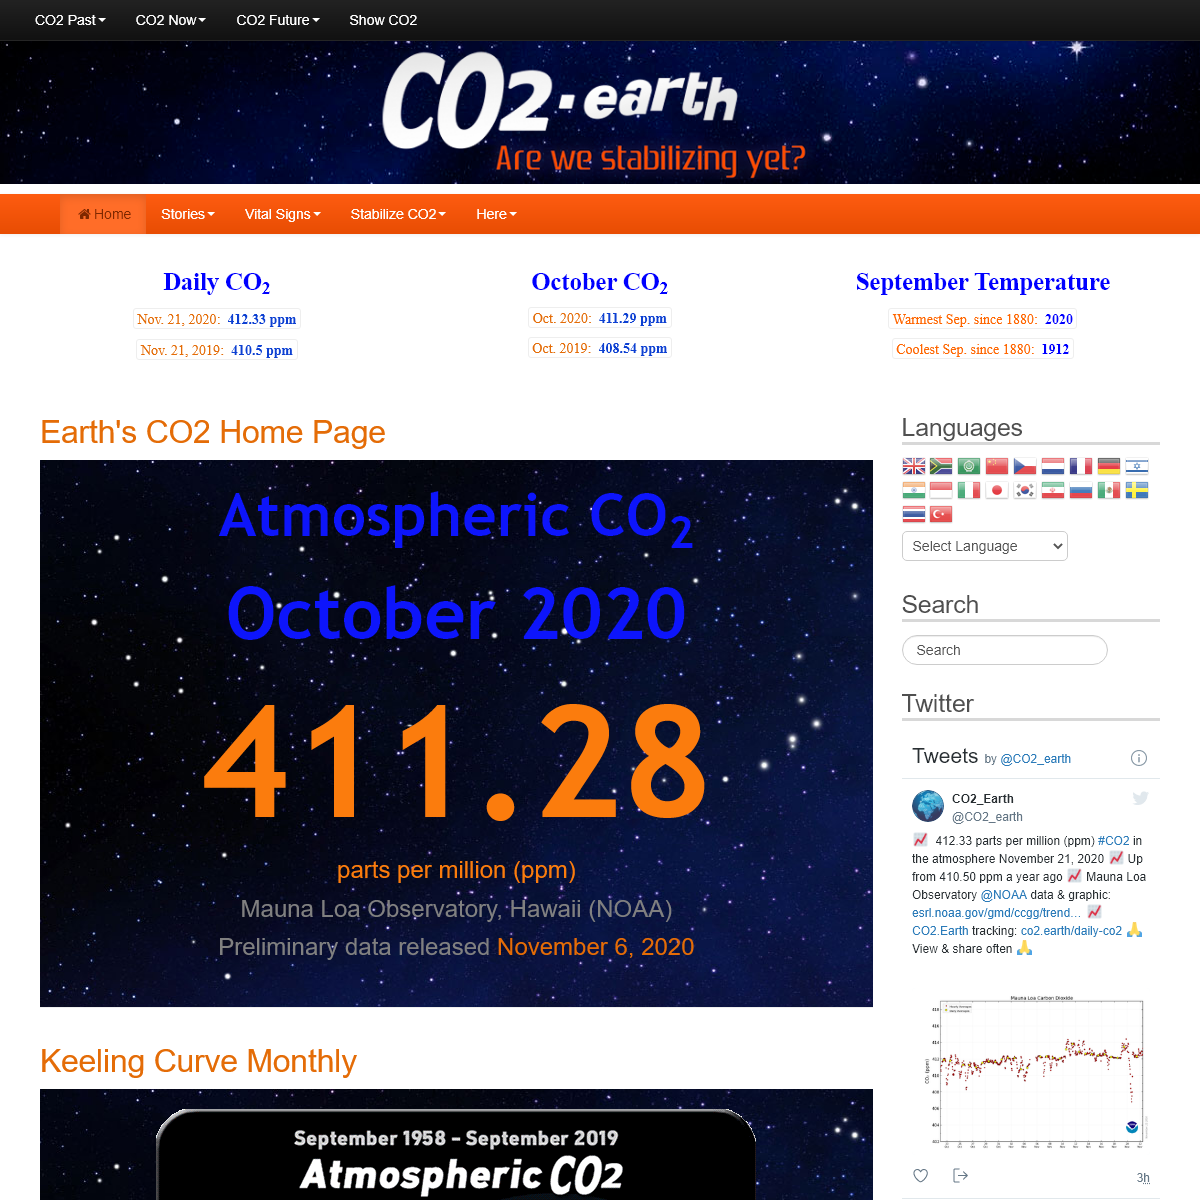 A complete backup of co2.earth